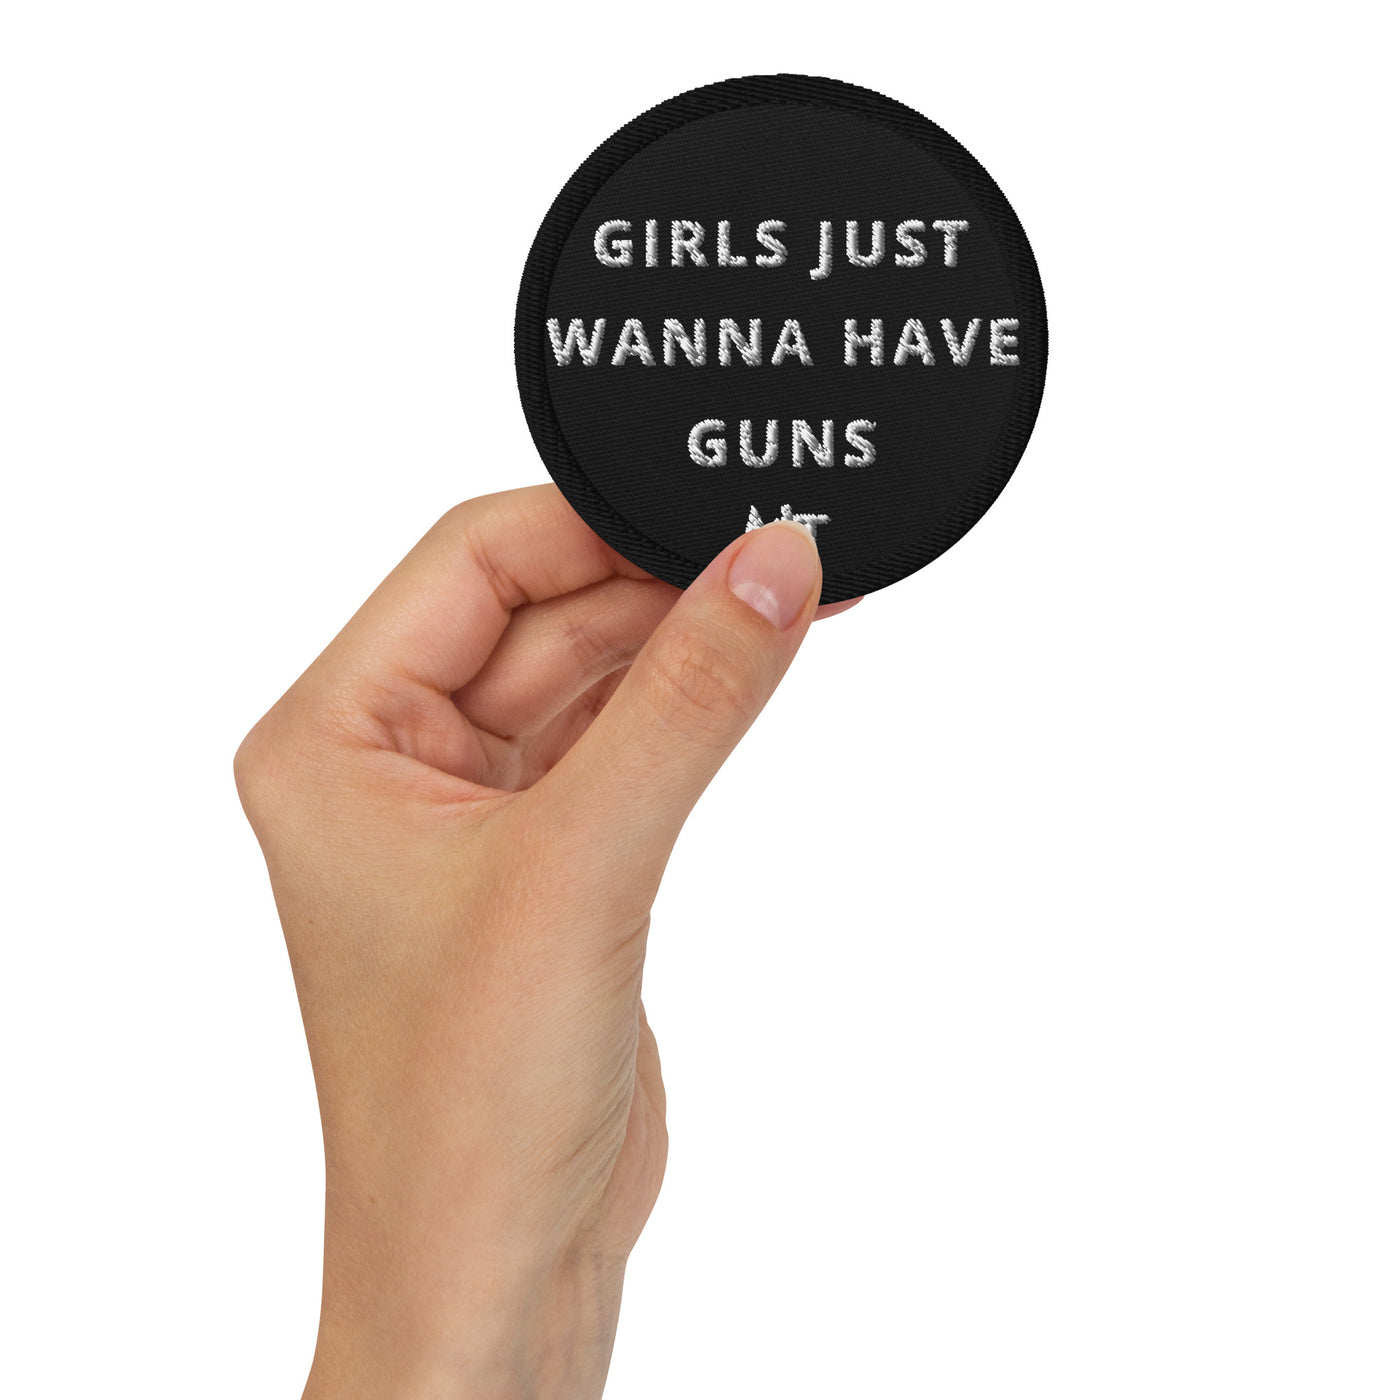 Girls just wanna have guns - Embroidered patches